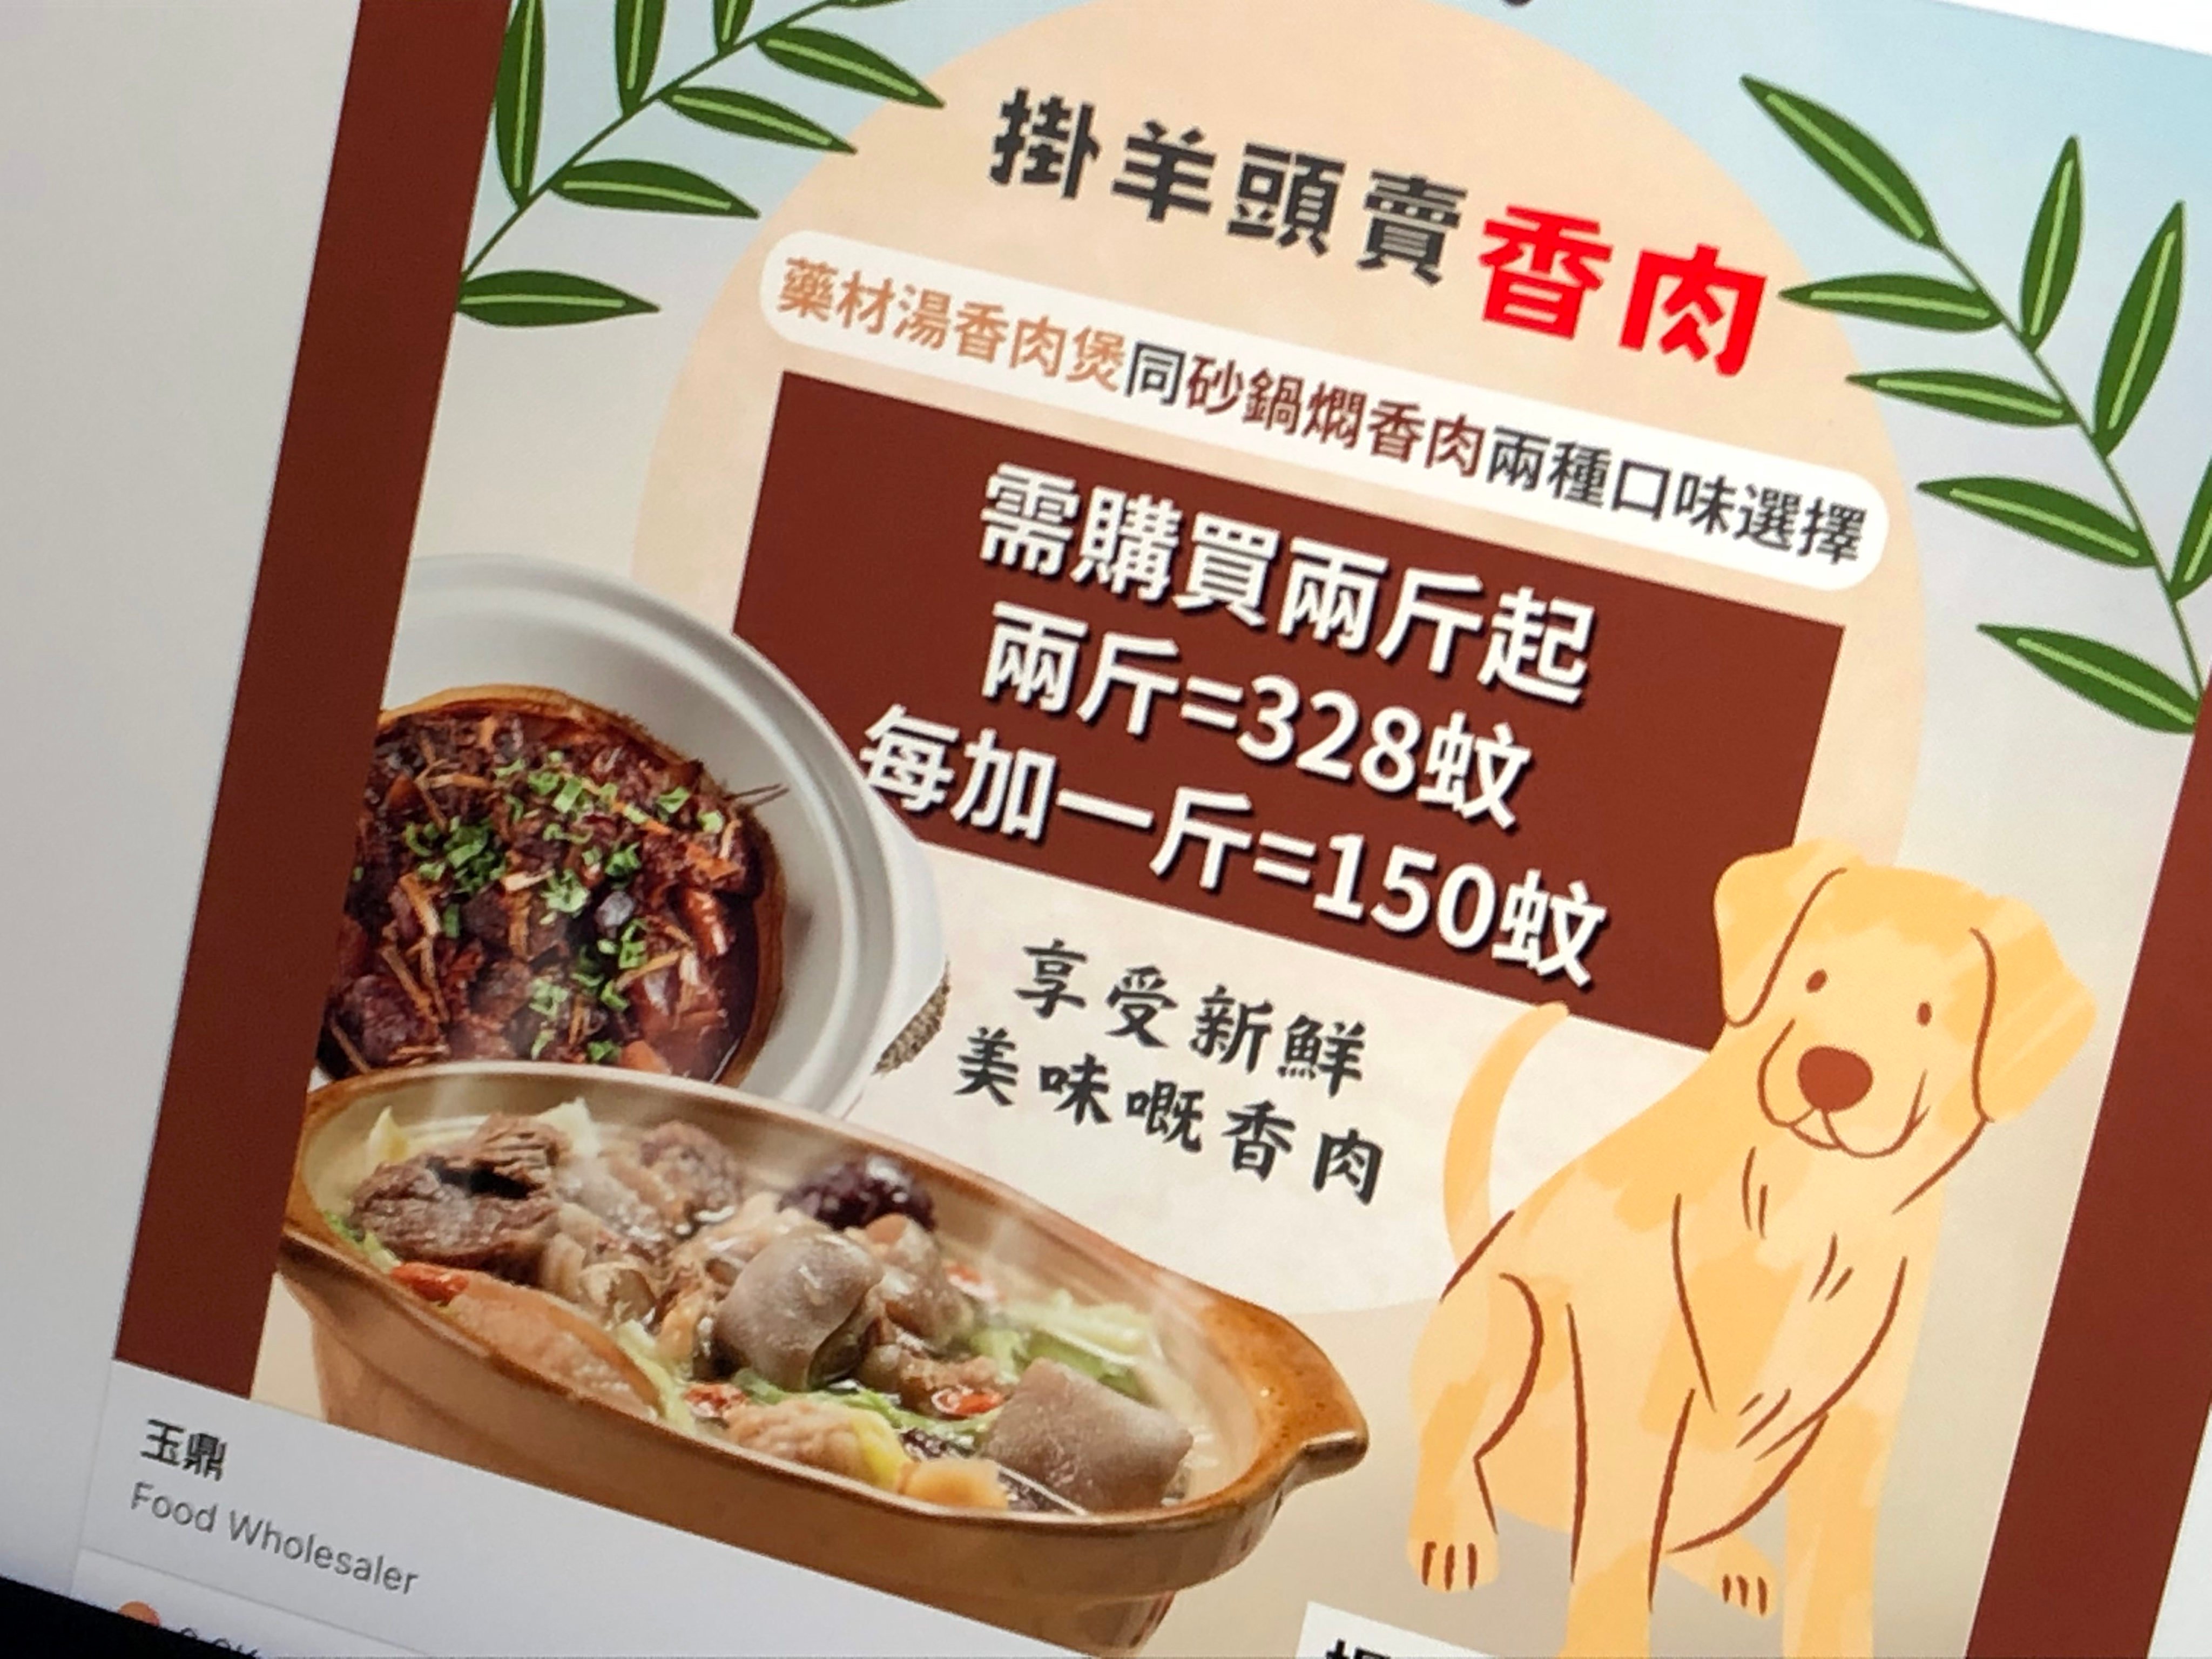 Hong Kong authorities are investigating a vendor suspected of selling dog meat, after an advert prompted fierce backlash from social media users. Photo: SCMP